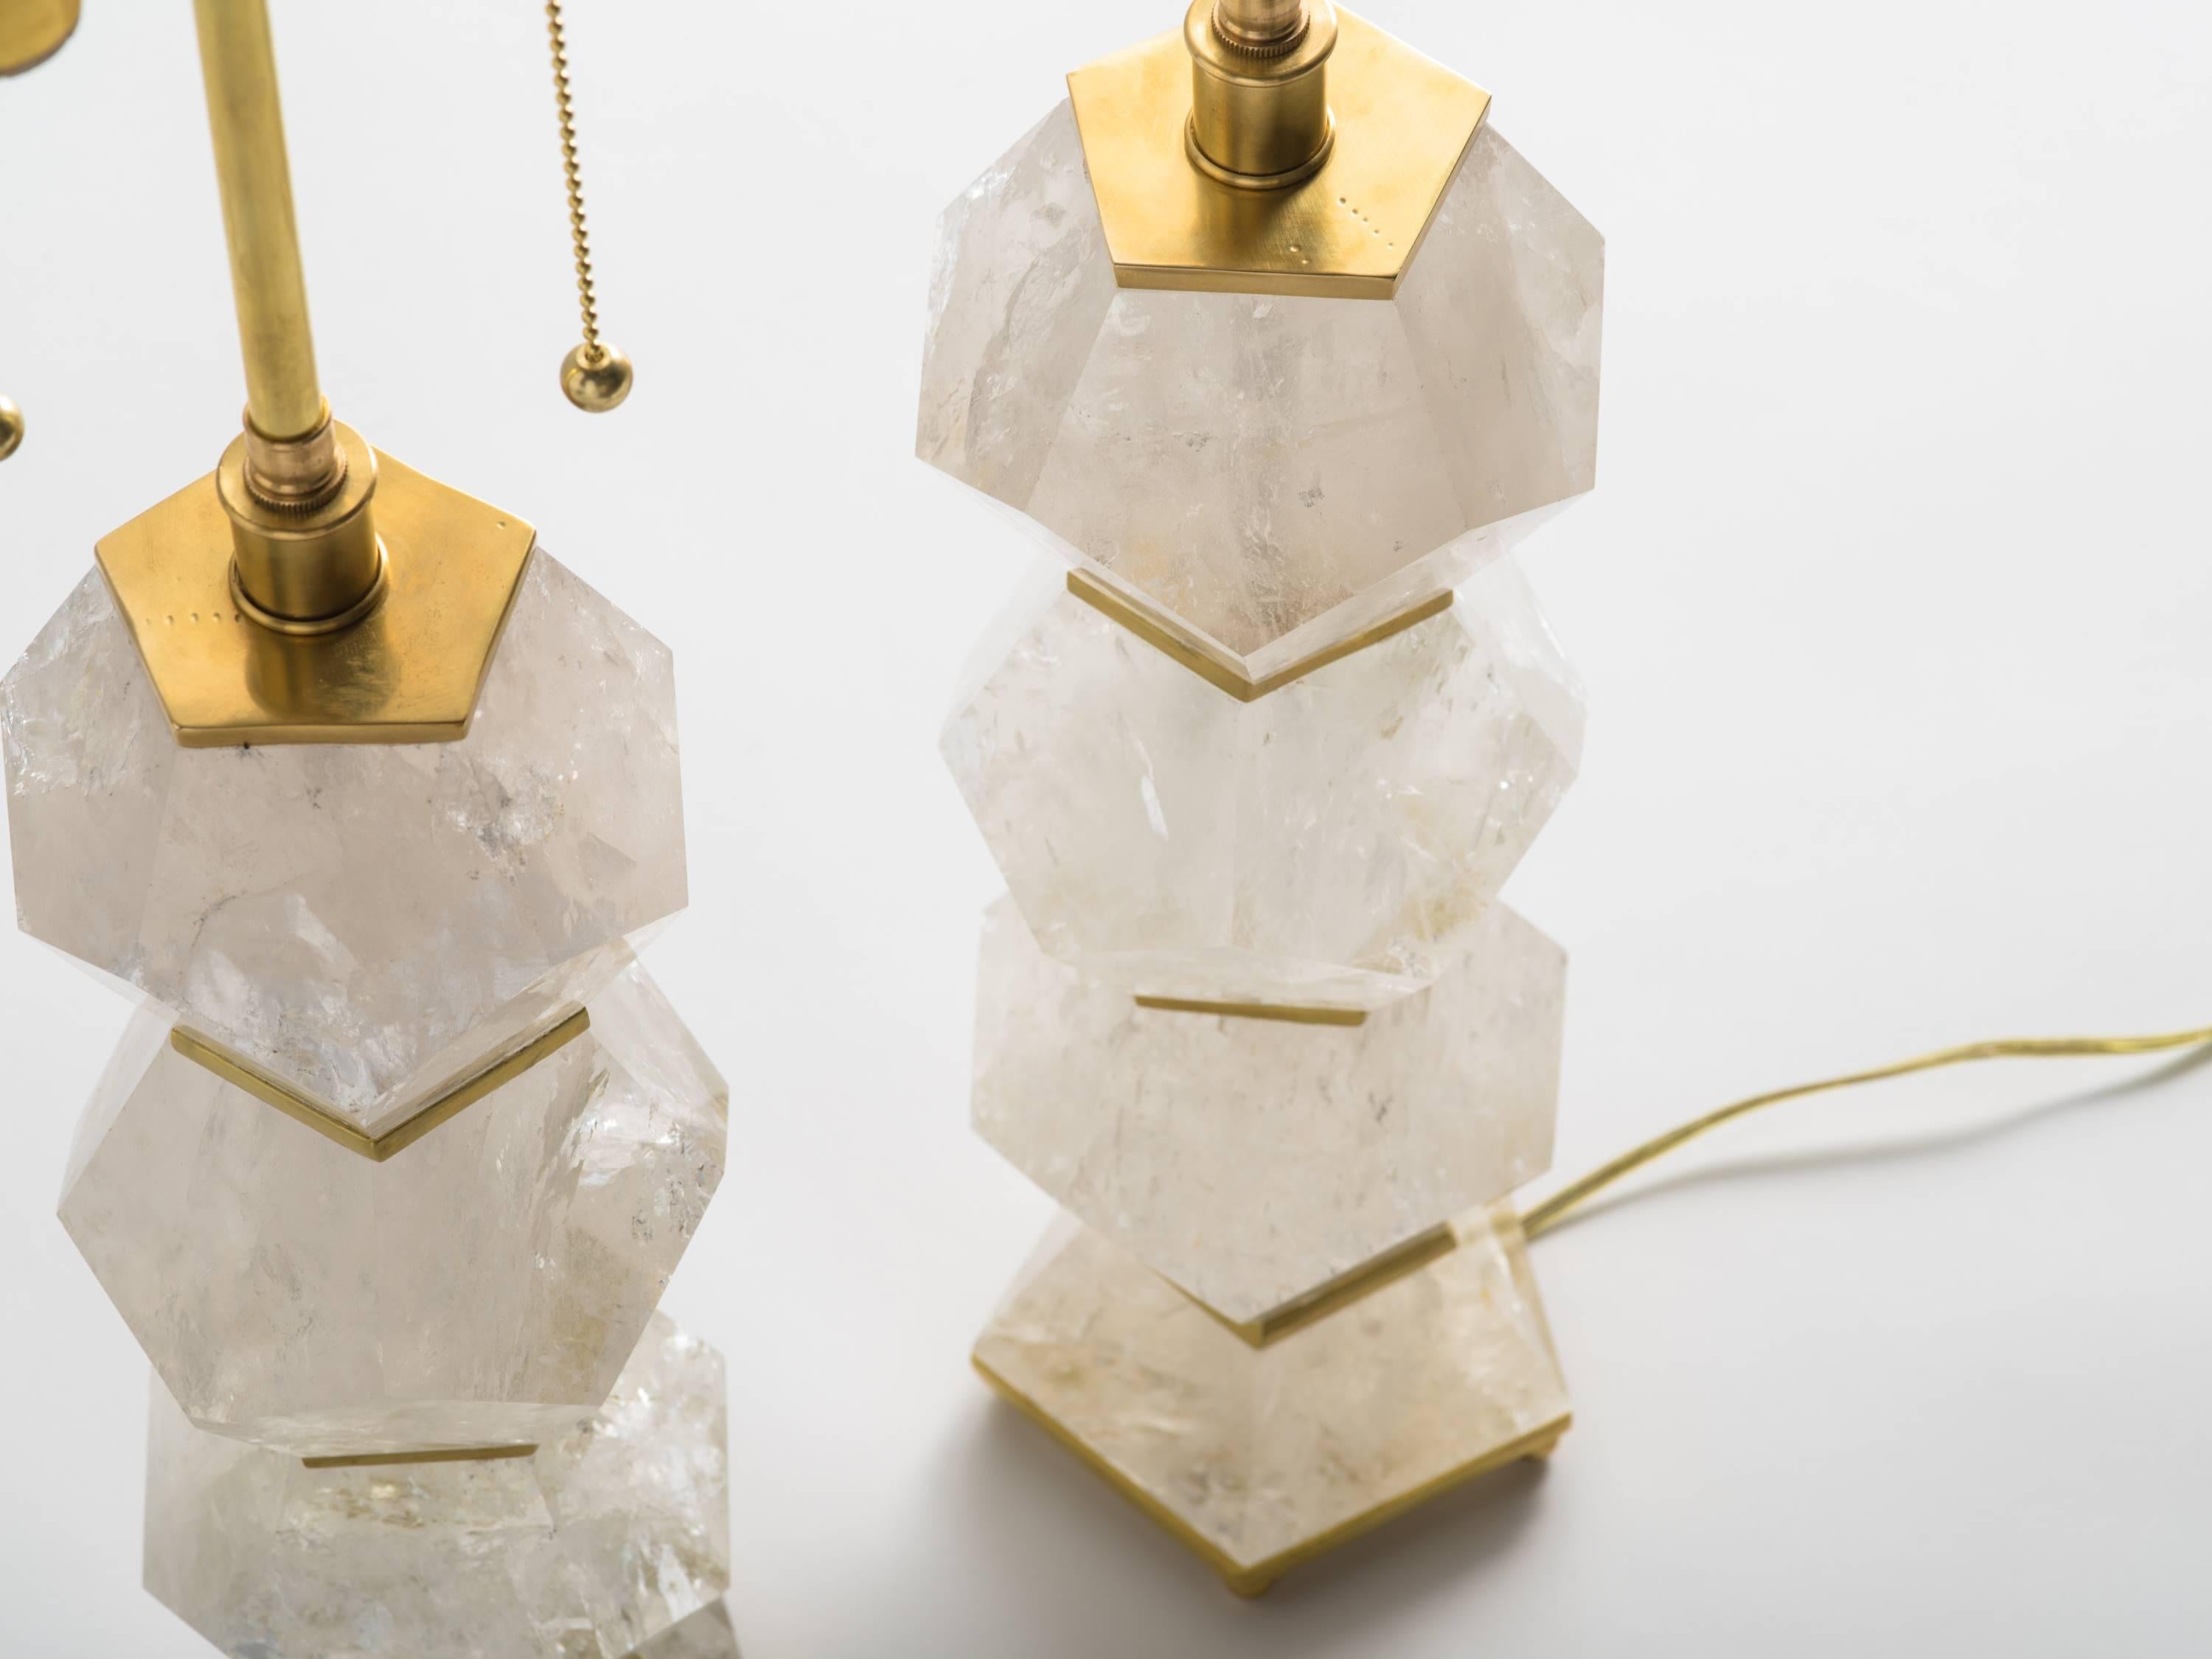 Hand-Crafted Classic Rock Crystal Quartz Lamps - 